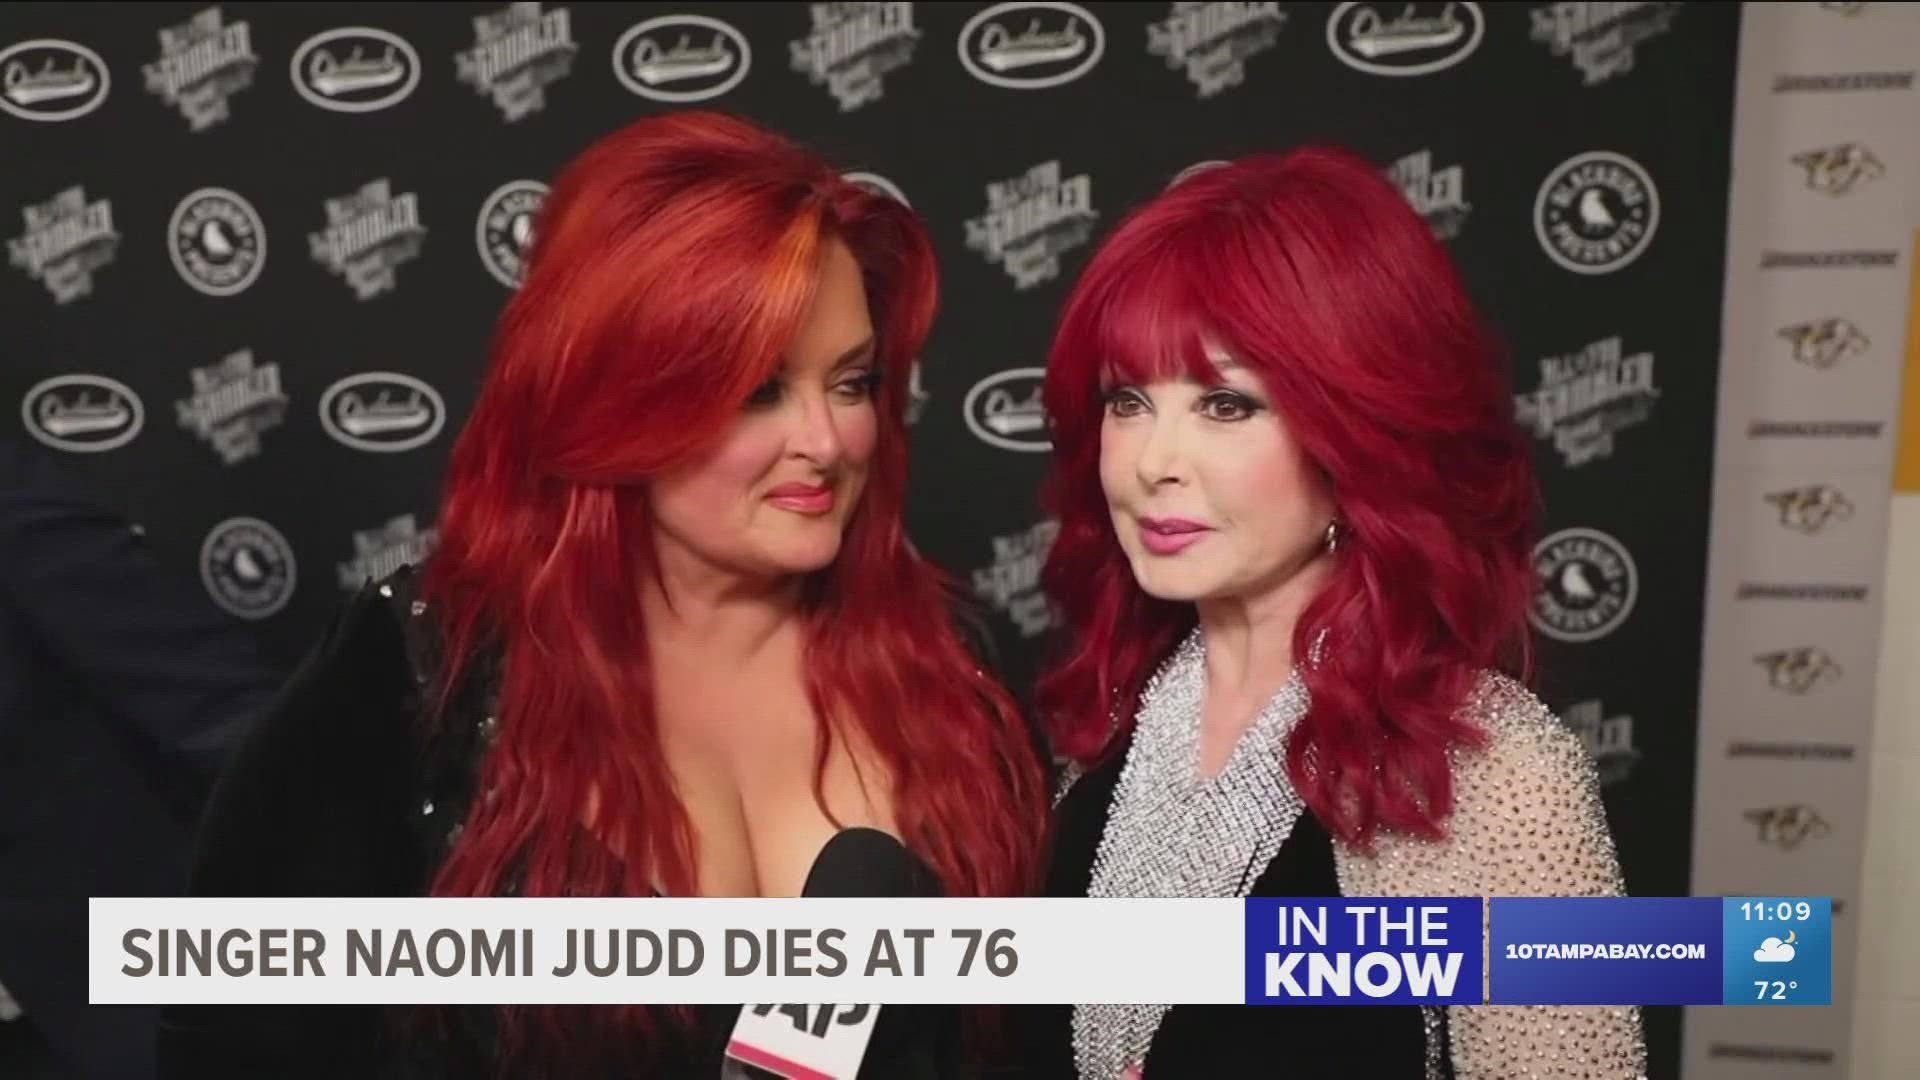 Country star Naomi Judd has died, one day before she was to be inducted into the Country Music Hall of Fame.